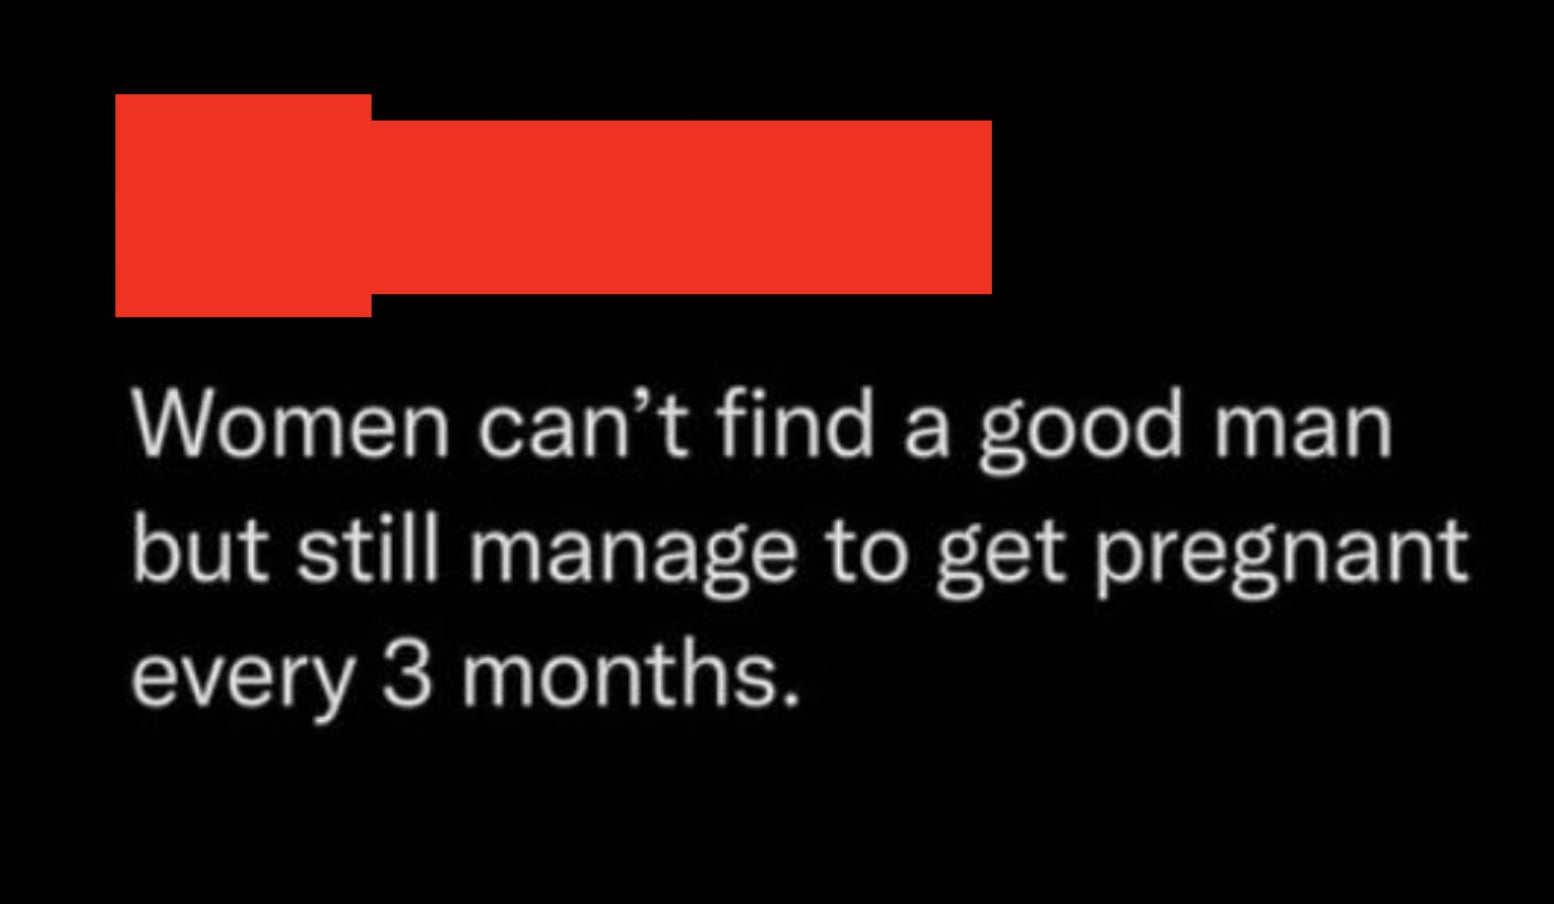 &quot;Women can&#x27;t find a good man but still manage to get pregnant every 3 months.&quot;